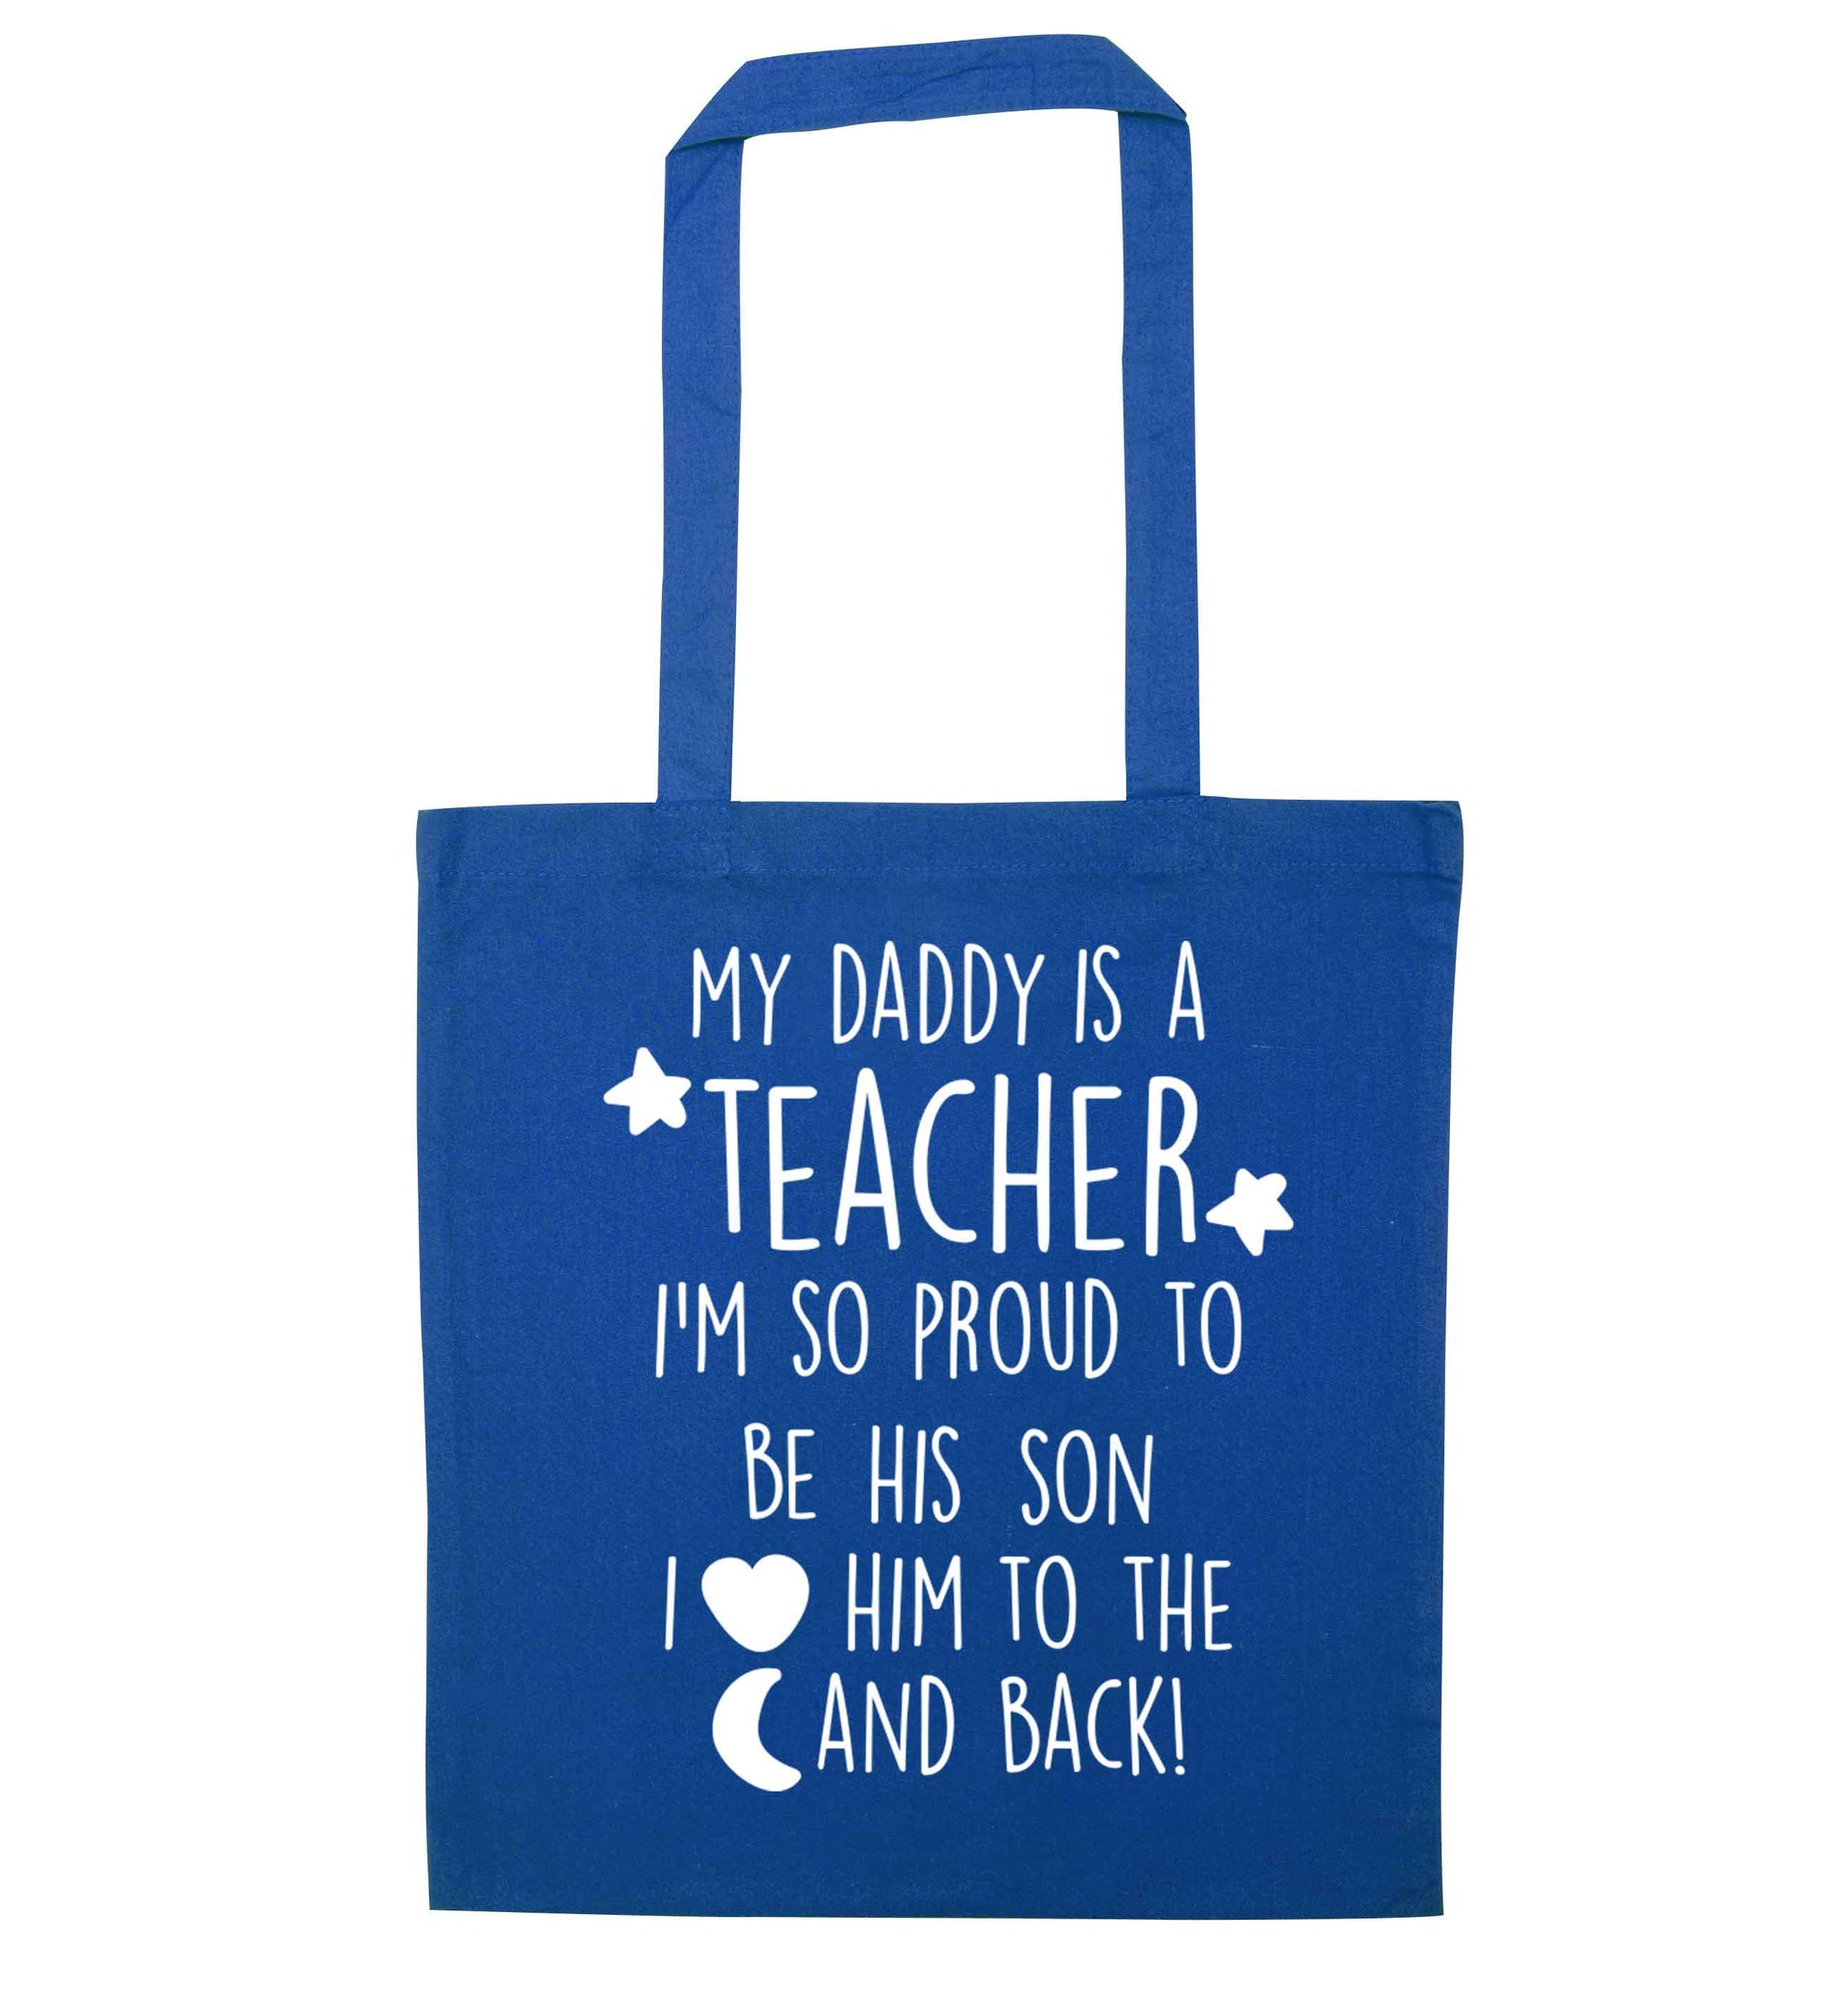 My daddy is a teacher I'm so proud to be his son I love her to the moon and back blue tote bag